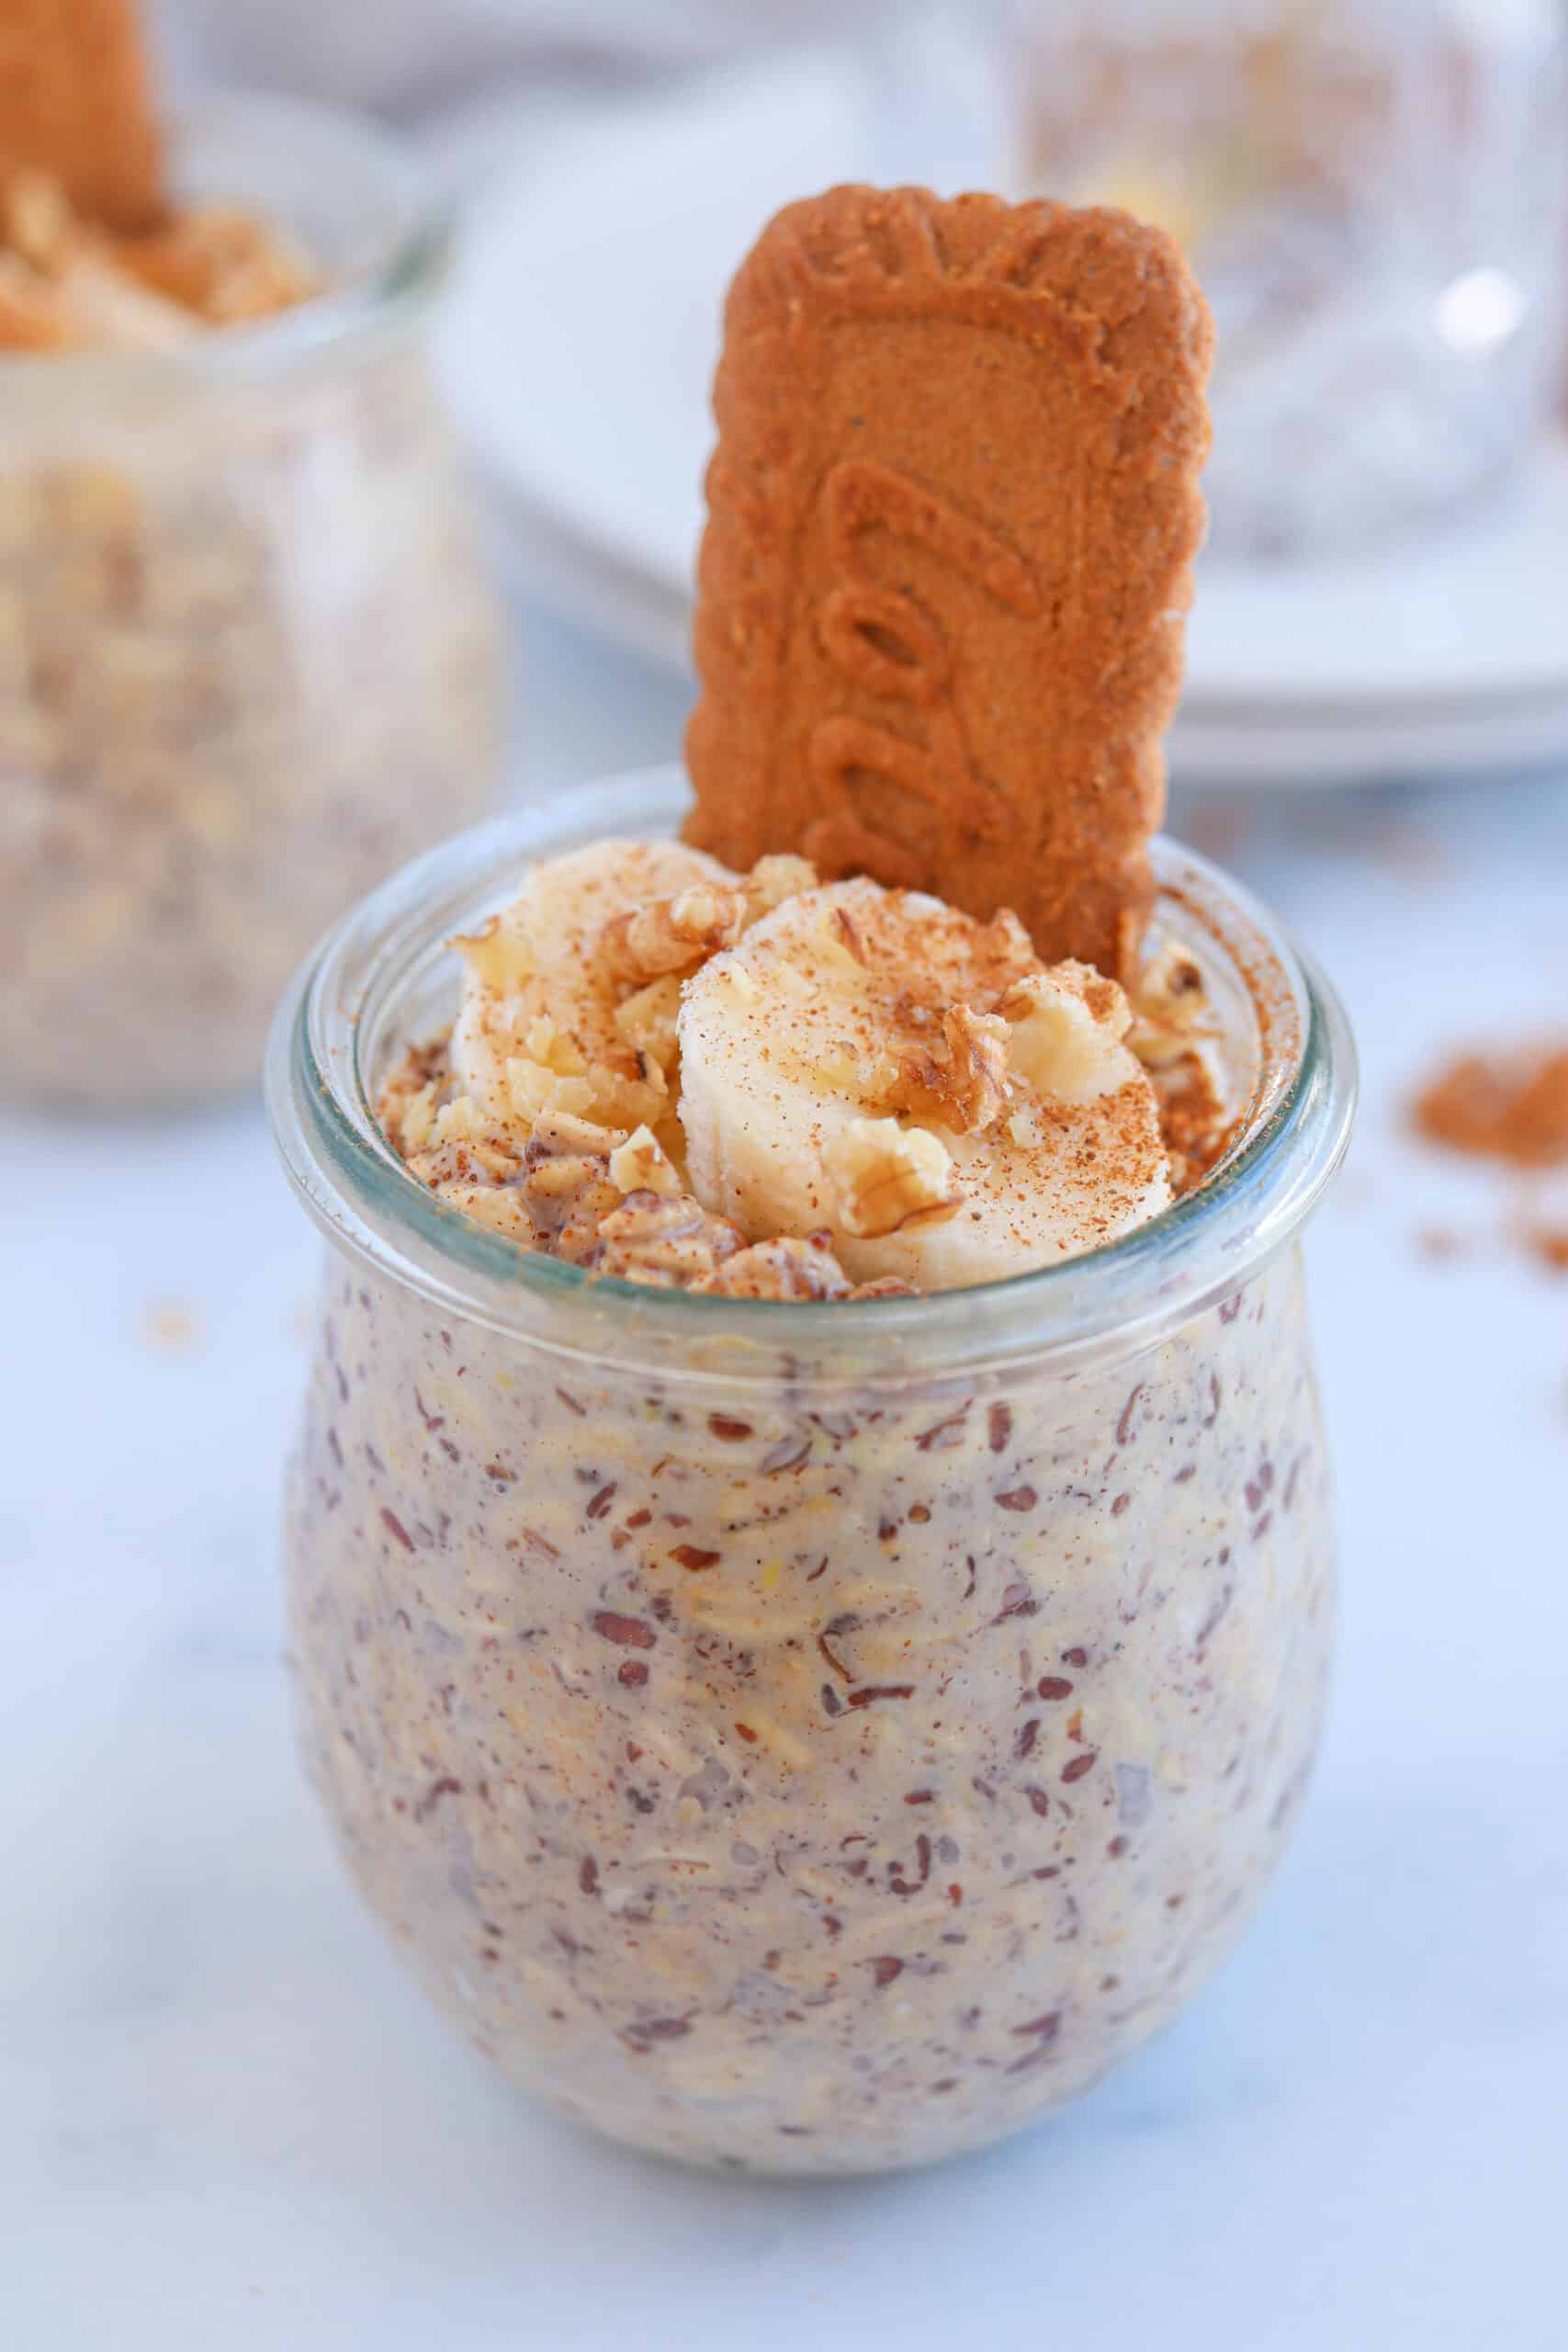 biscoff overnight oats in a tulip jar topped with sliced banana, walnuts and crushed biscoff cookies.